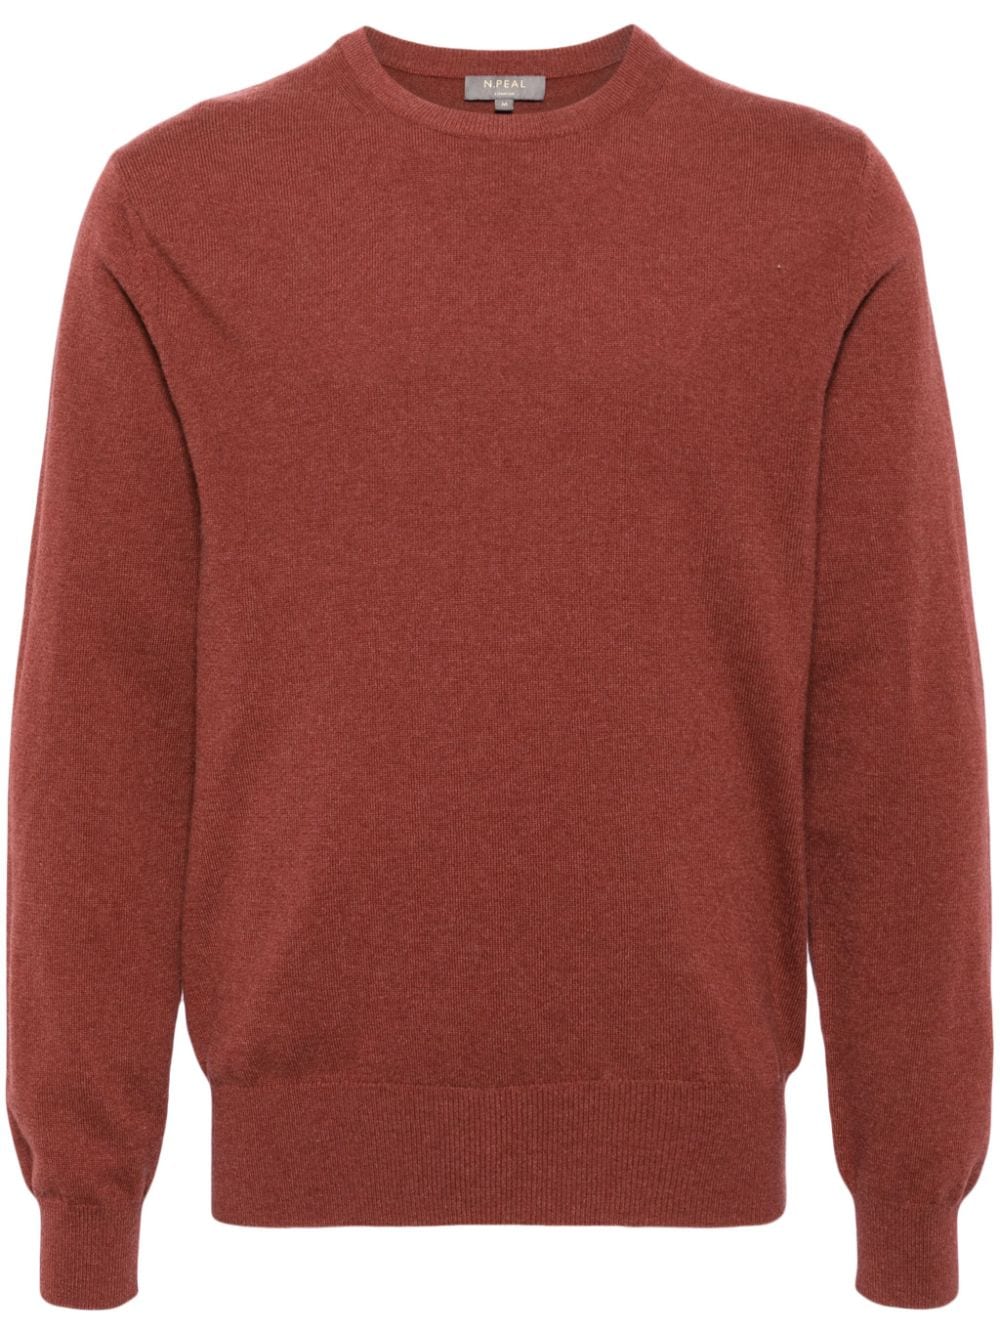 N.Peal The Oxford cashmere jumper - Red von N.Peal